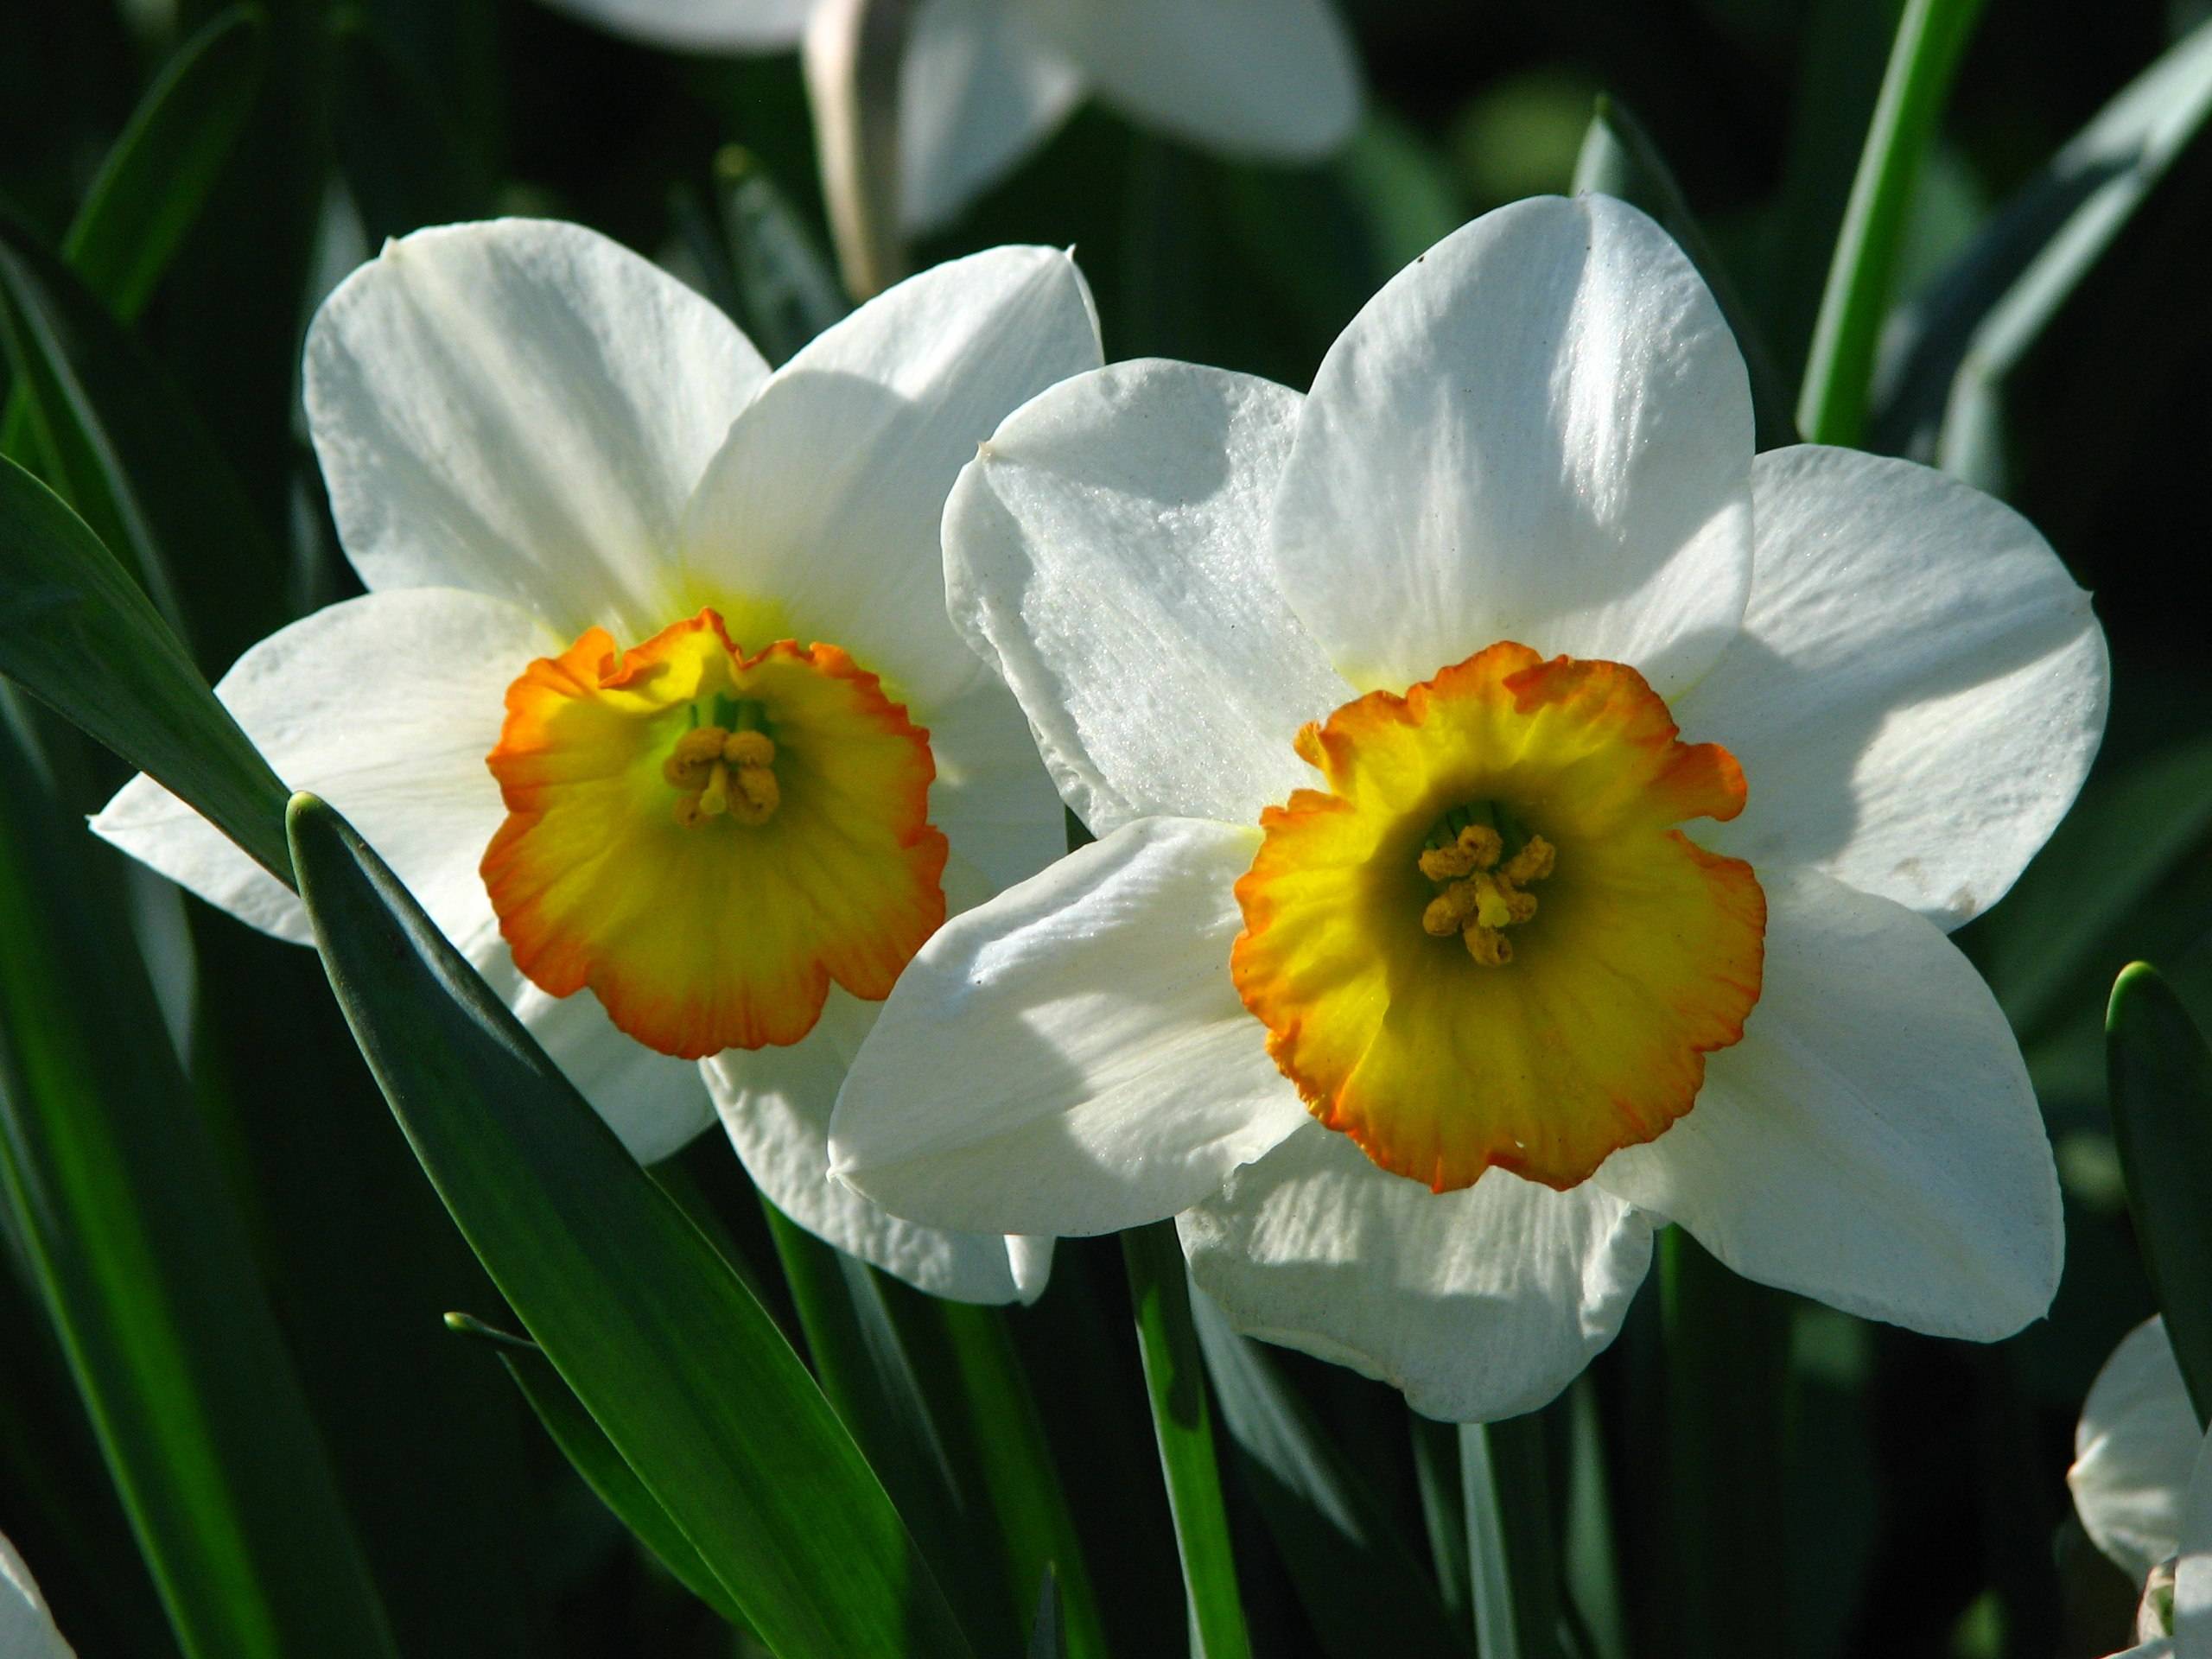 white flowers with orange-yellow center, yellow anthers, green leaves and stems